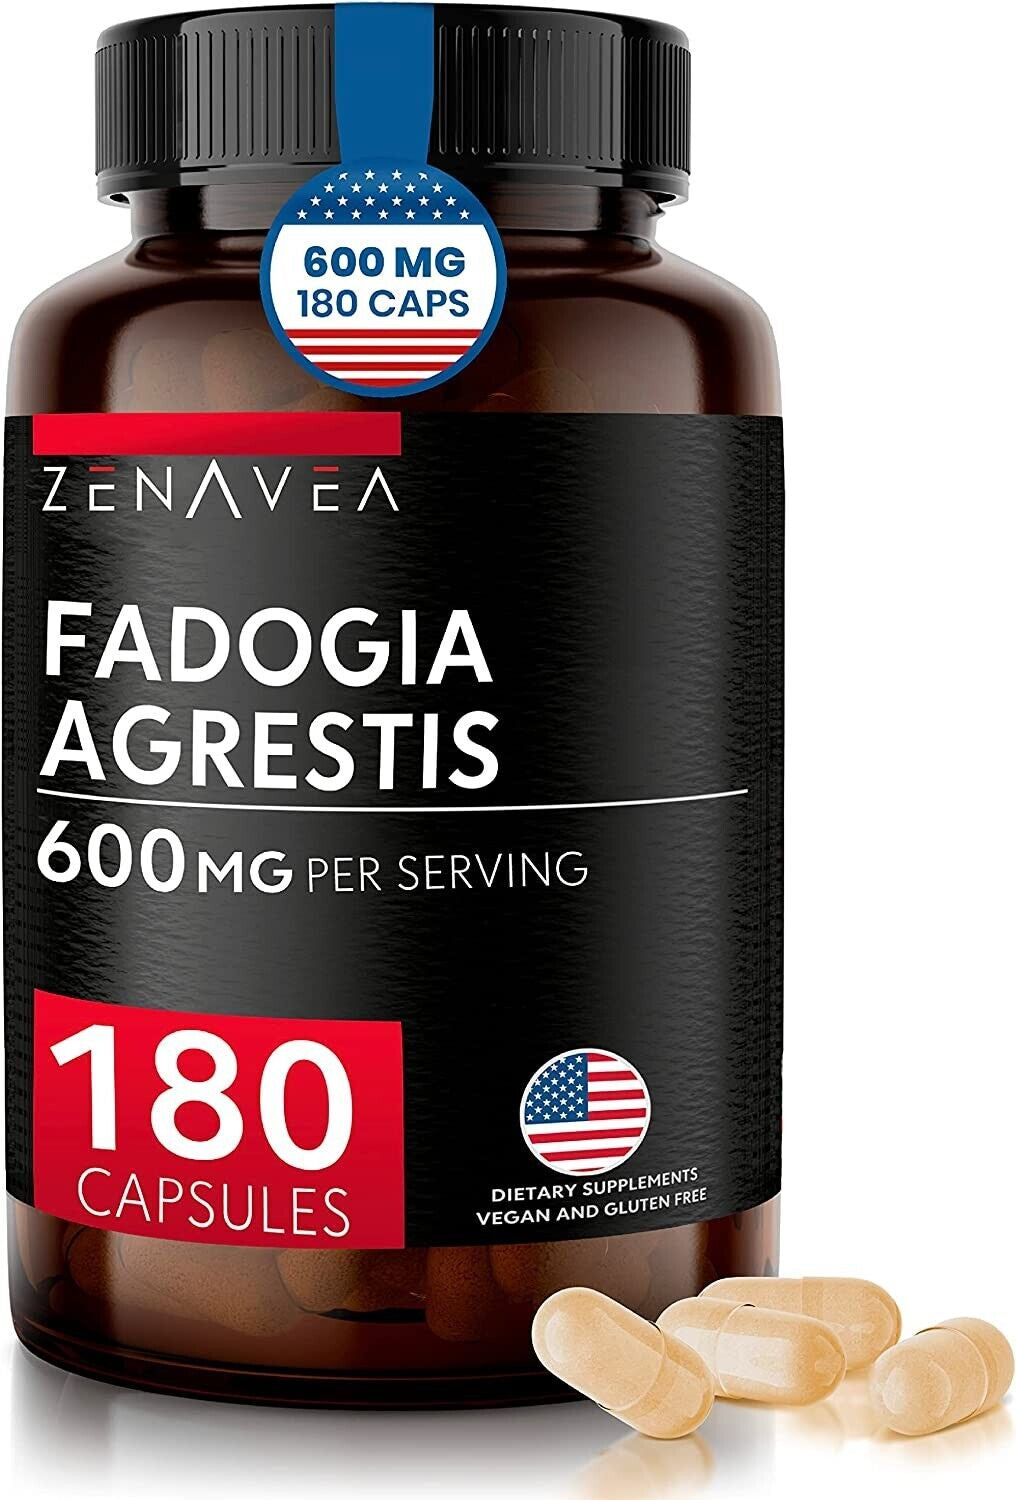 Fadogia Agrestis 600Mg Extract - 180 Capsules 3-Months Supply - Fadogia Suppleme